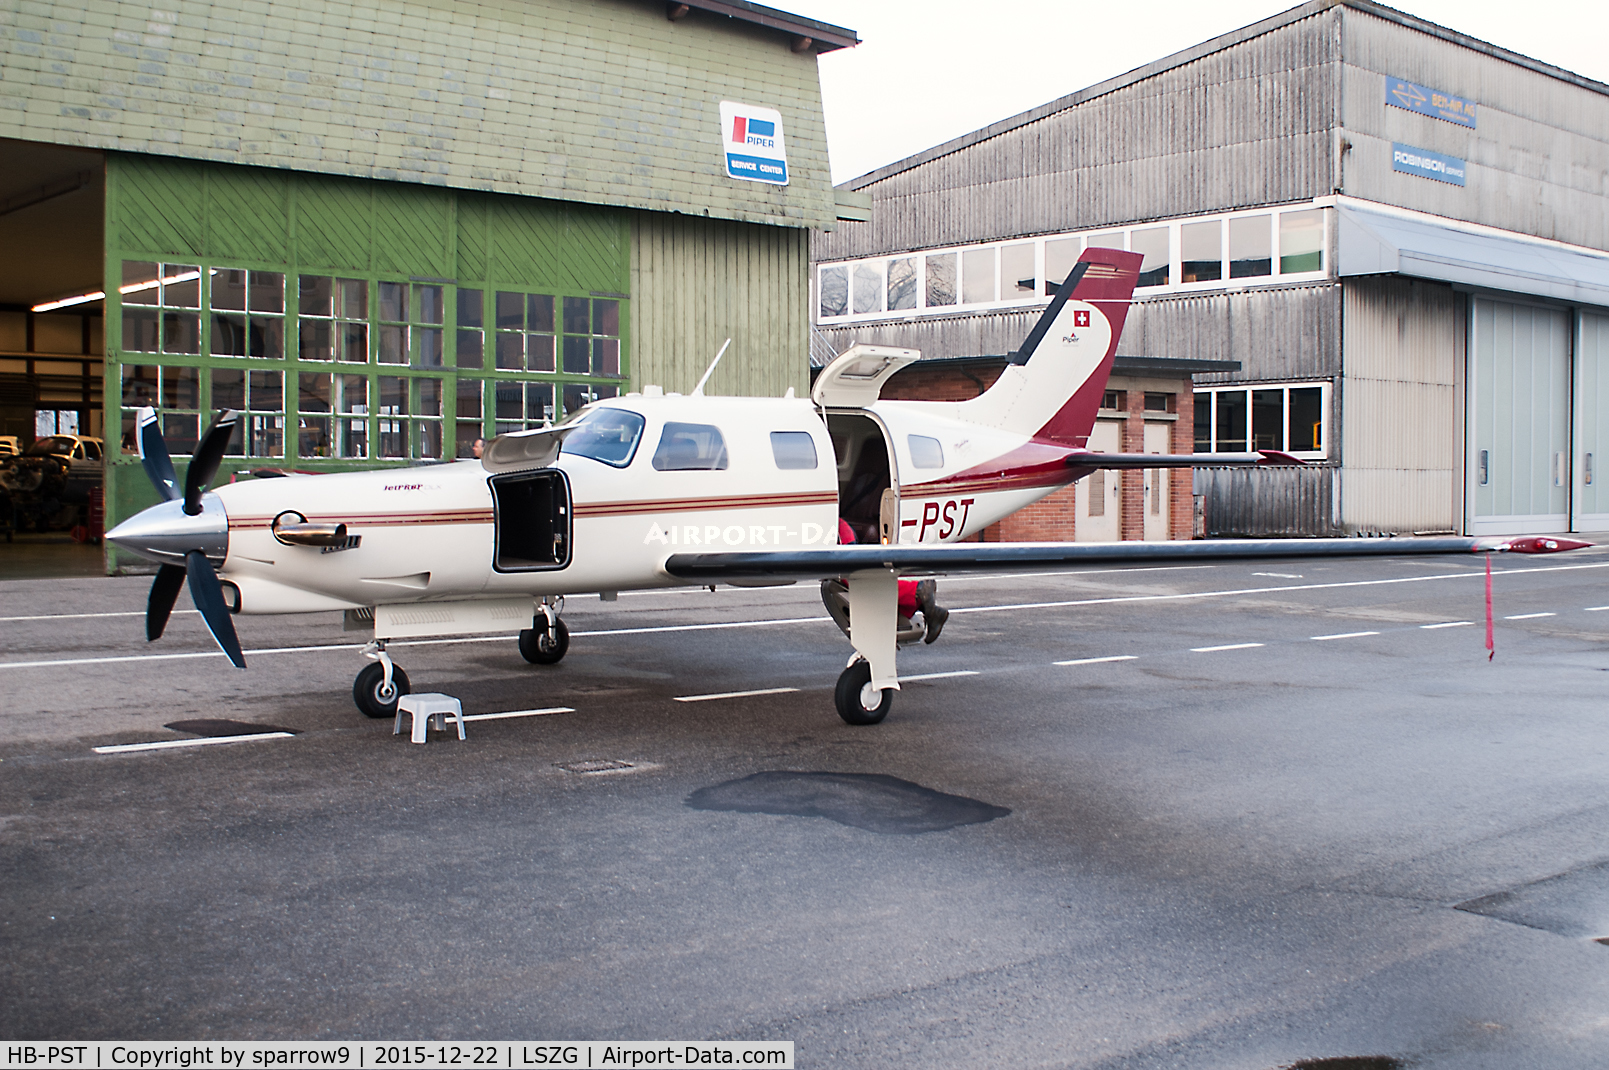 HB-PST, 1998 Piper PA-46-350P Malibu Mirage C/N 4636142, Maintenance at Grenchen. HB-registered since 2013-04-16.